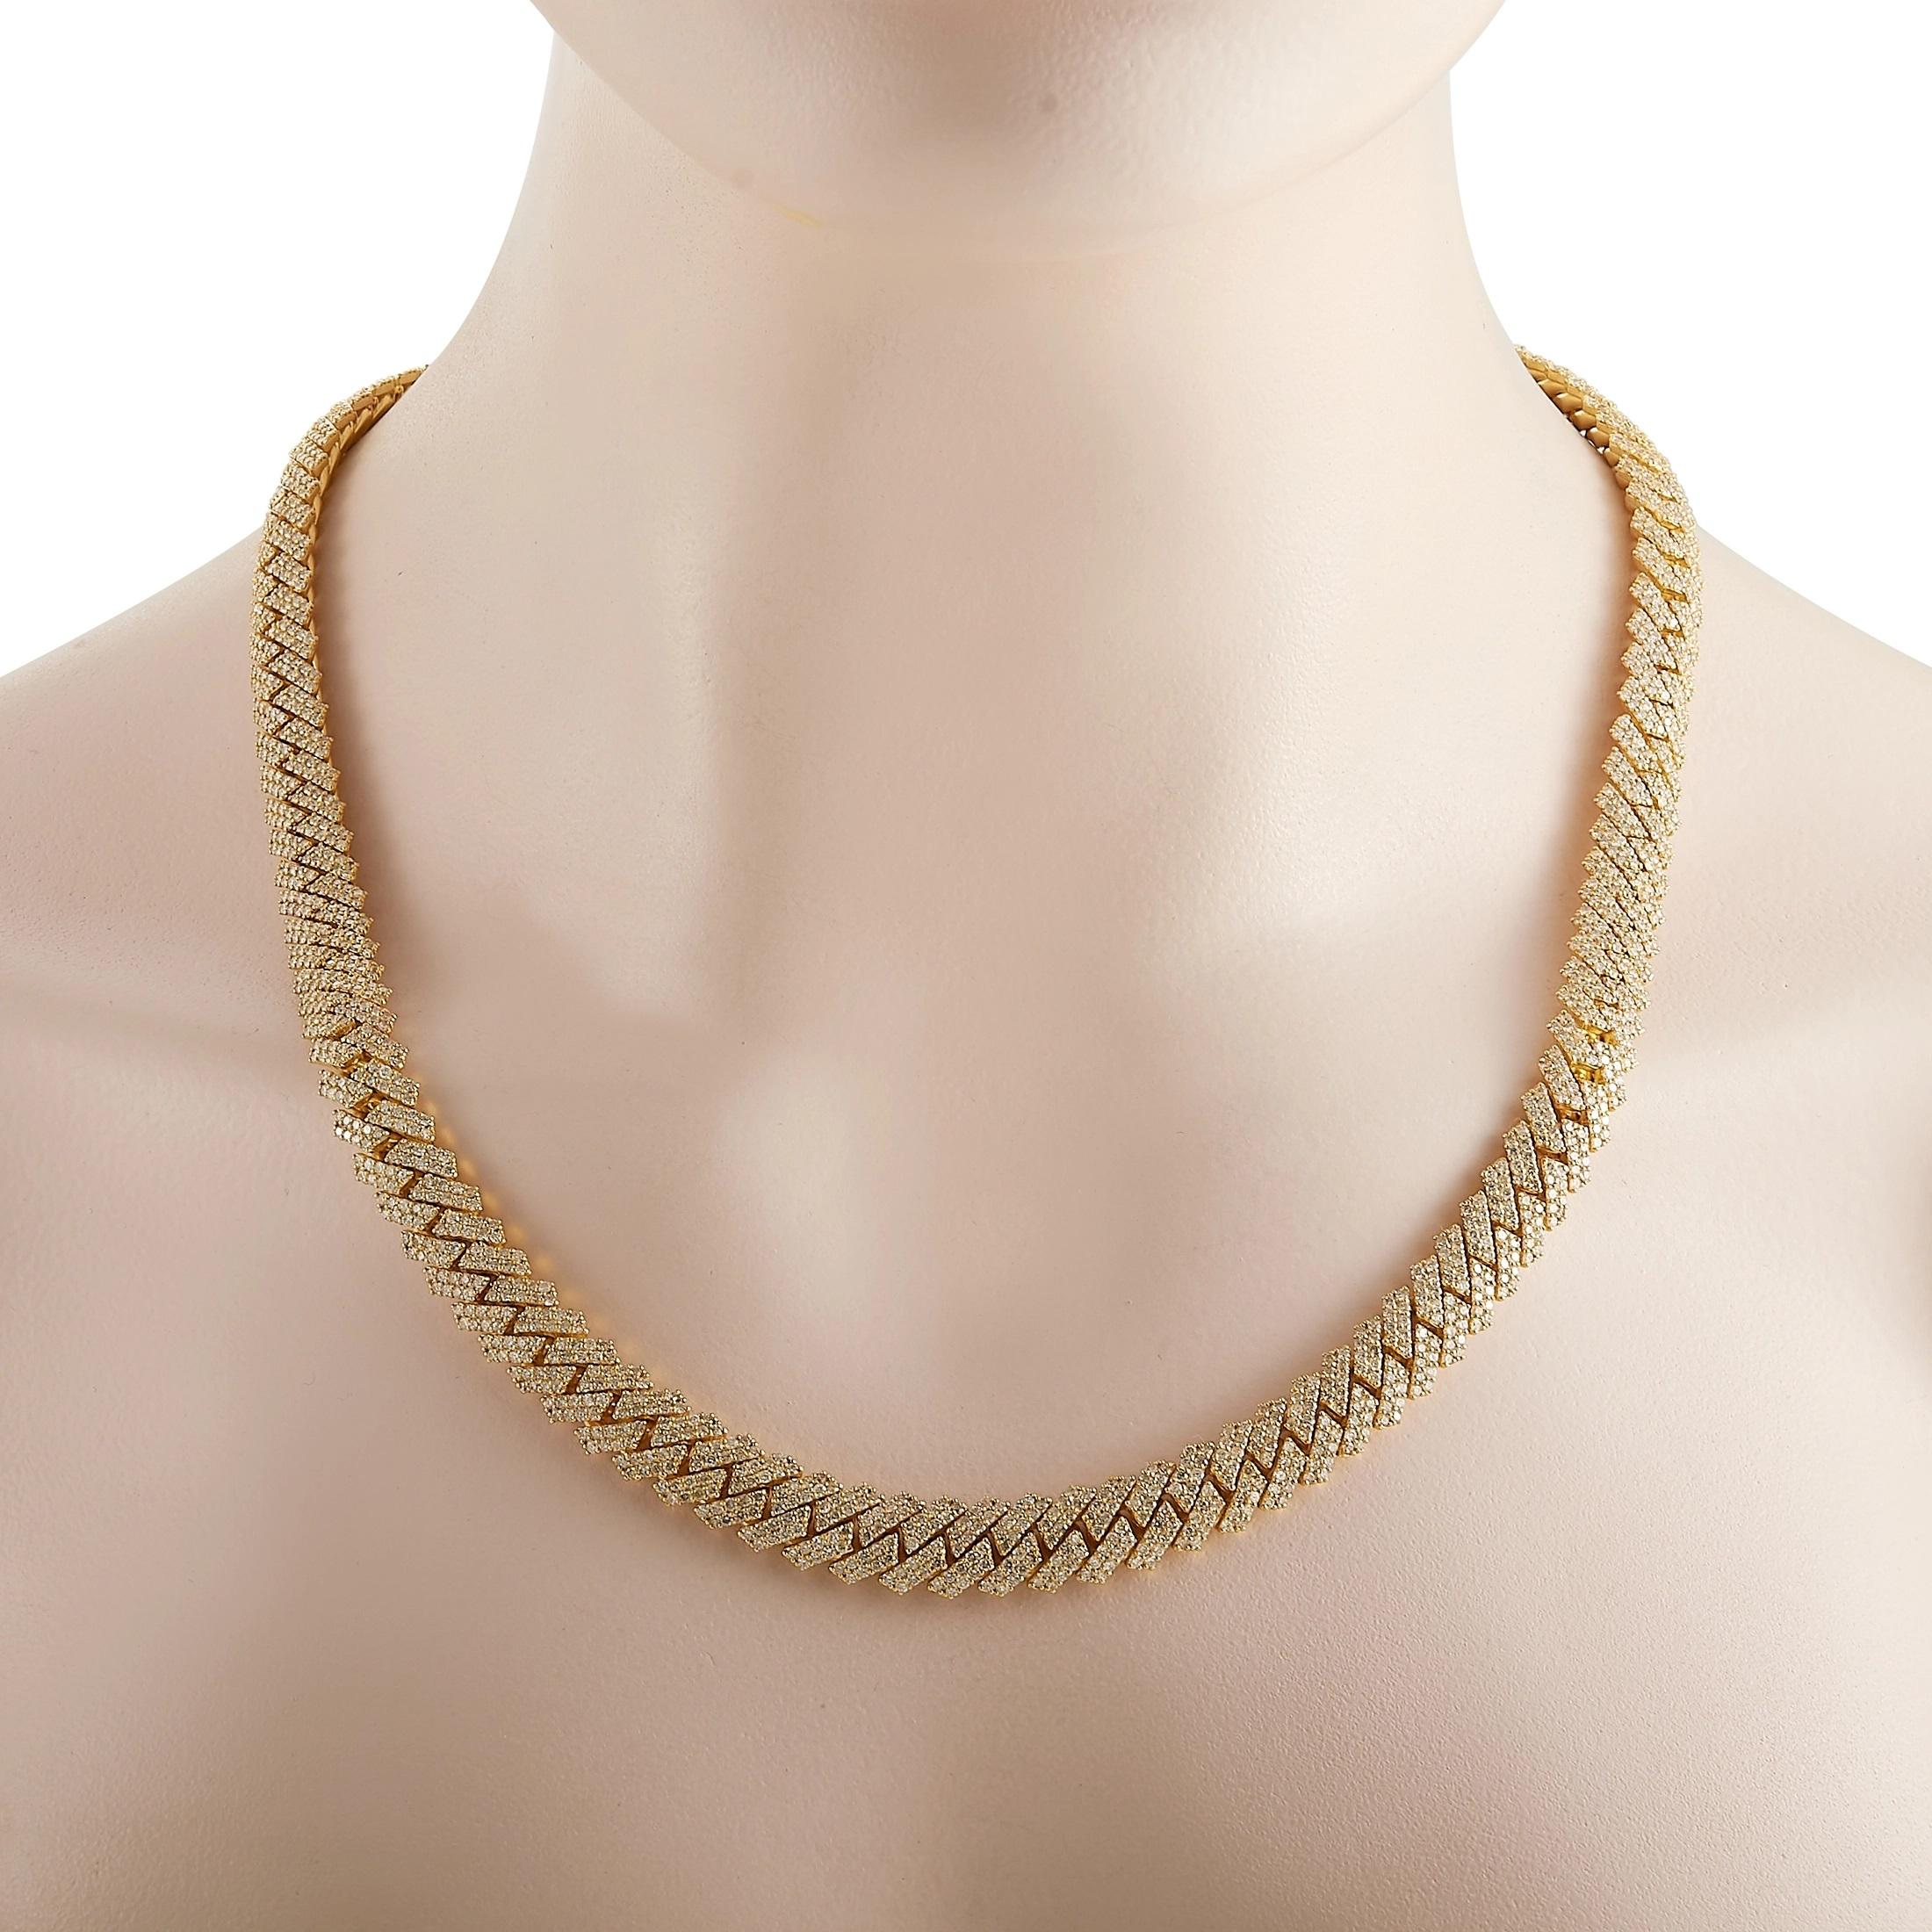 A bold, chain-style design measuring 22” long makes this luxury necklace a true showpiece. The only thing more stylish than the minimalist 14K Yellow Gold setting is the stunning array of diamonds, which together total 23.85 carats. A